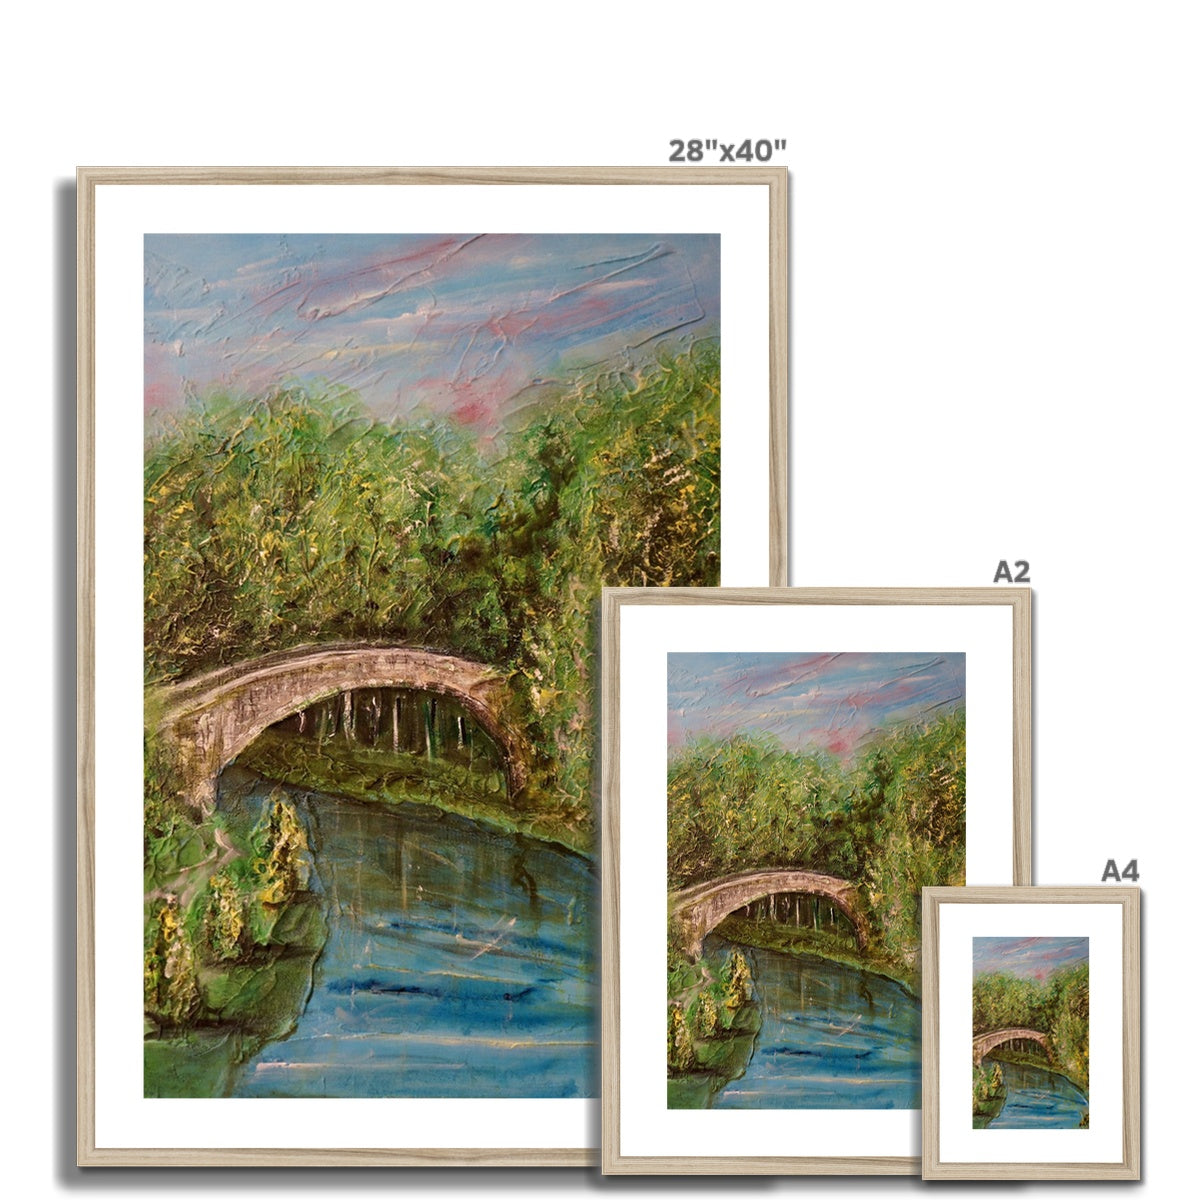 The Brig O Doon Painting | Framed & Mounted Prints From Scotland-Framed & Mounted Prints-Historic & Iconic Scotland Art Gallery-Paintings, Prints, Homeware, Art Gifts From Scotland By Scottish Artist Kevin Hunter